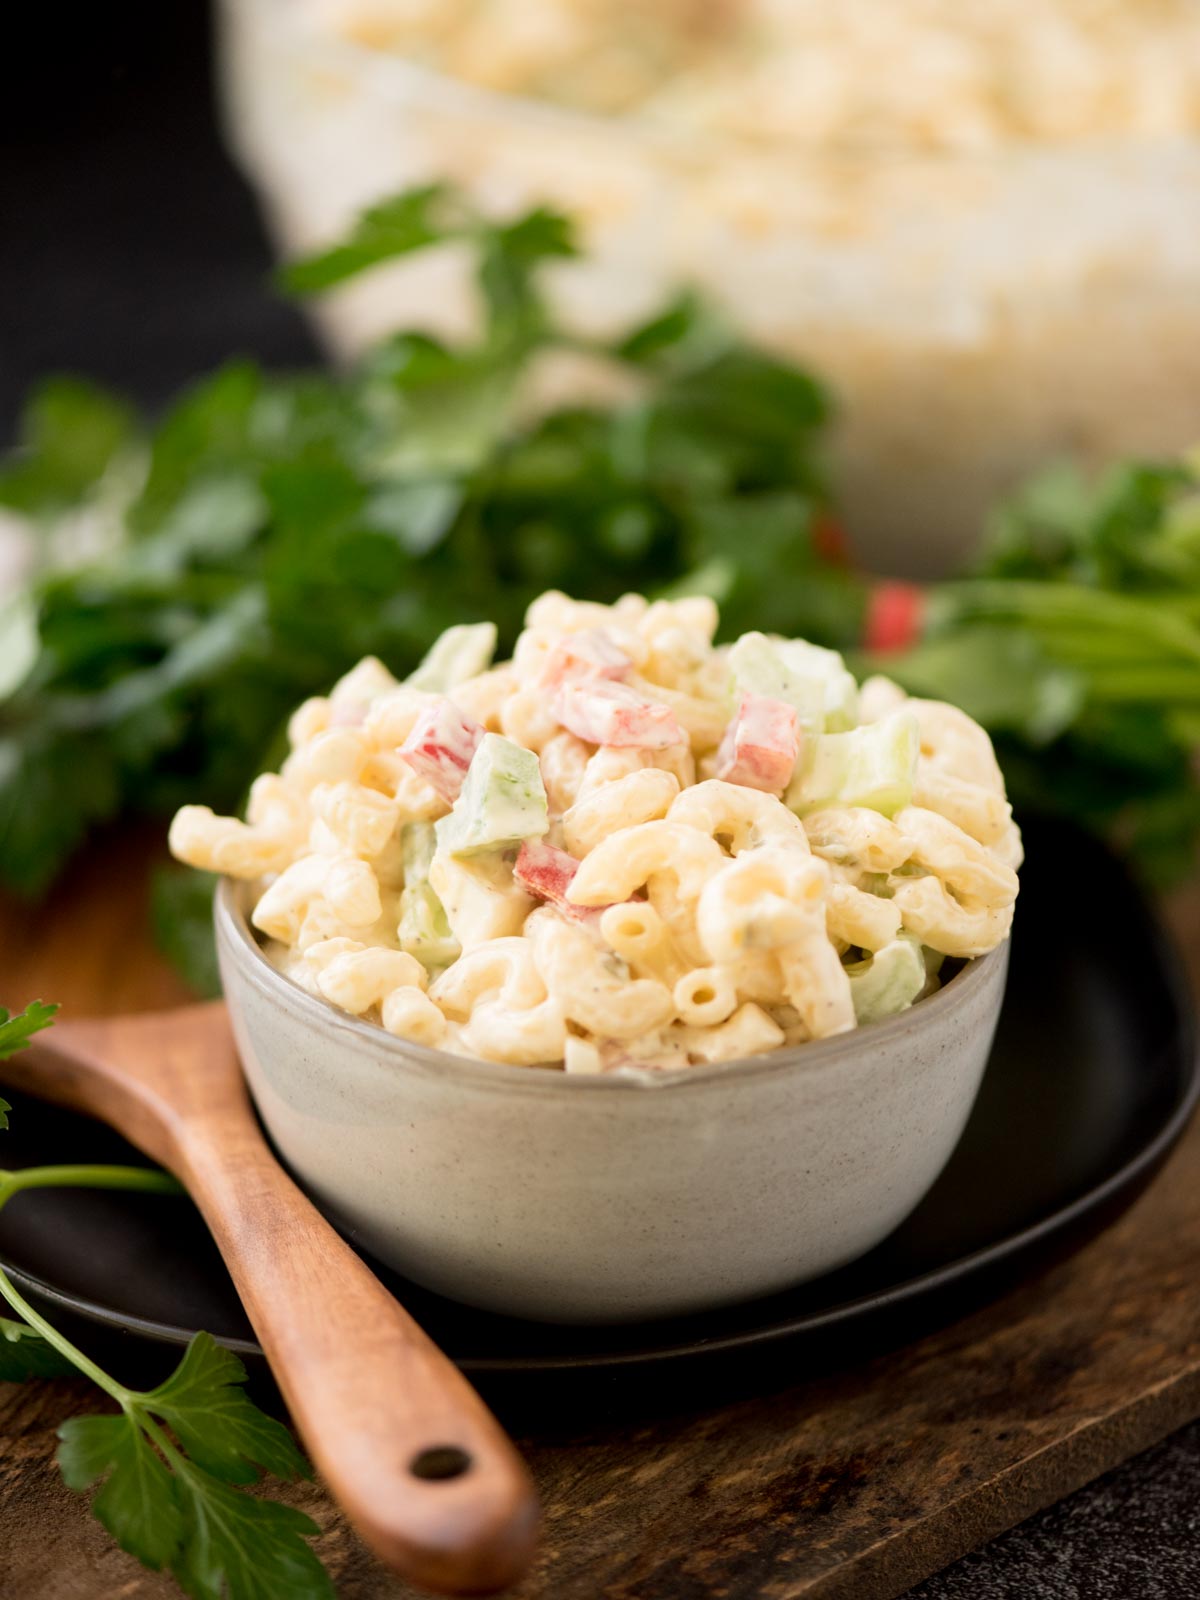 Macaroni salad in a grey bowl surrounded by a serving spoon and fresh parsley.